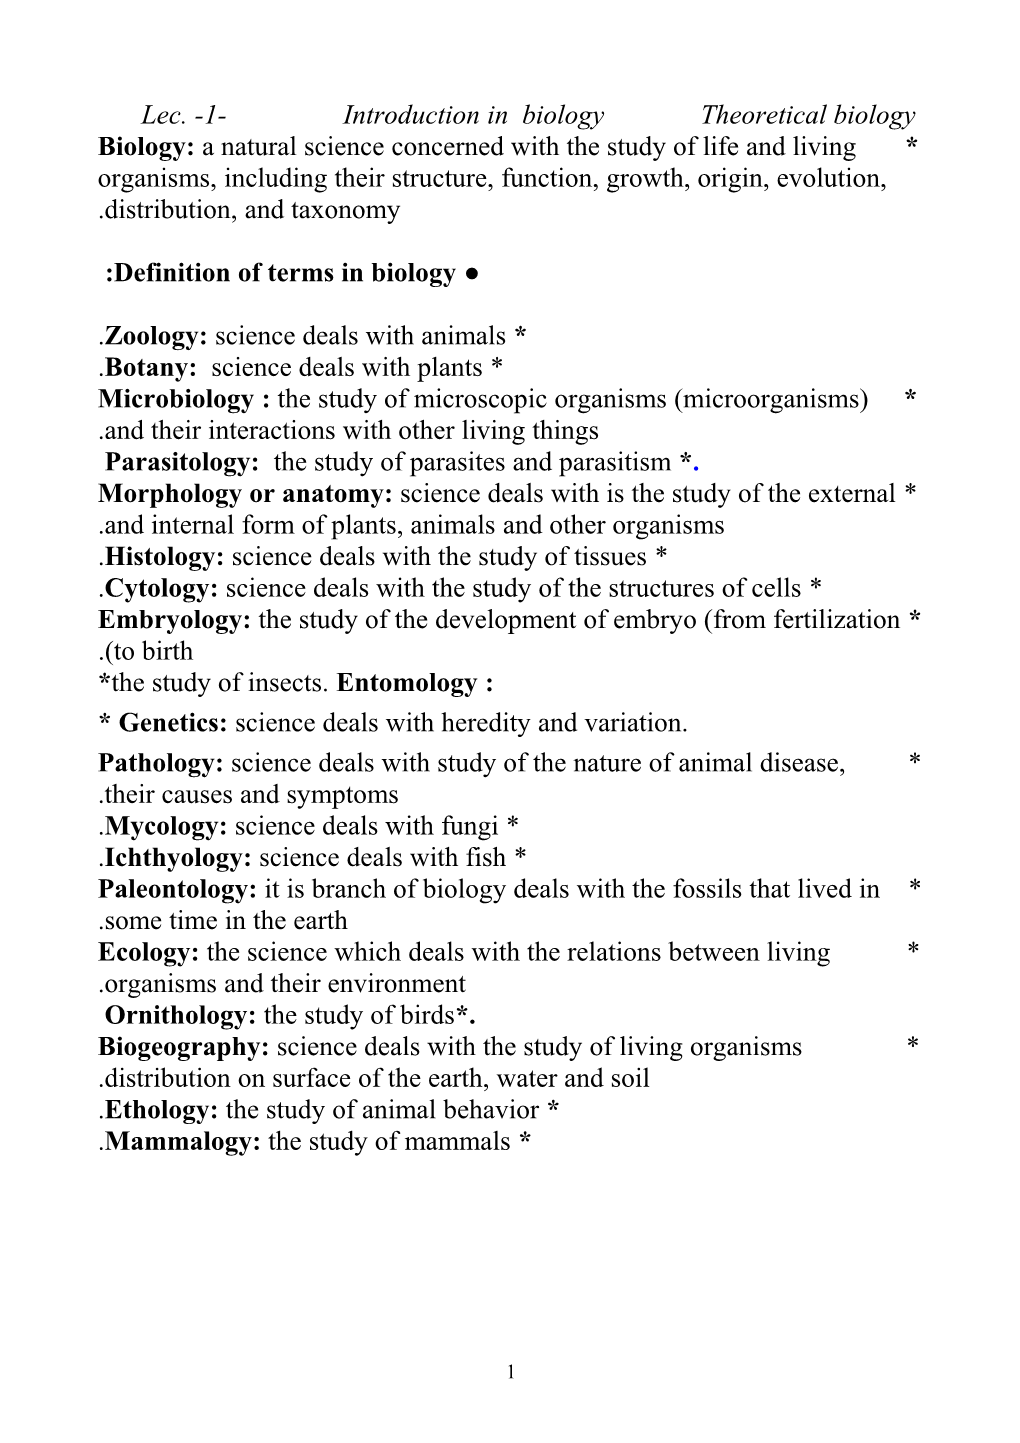 Lec. -1- Introduction in Biology Theoretical Biology